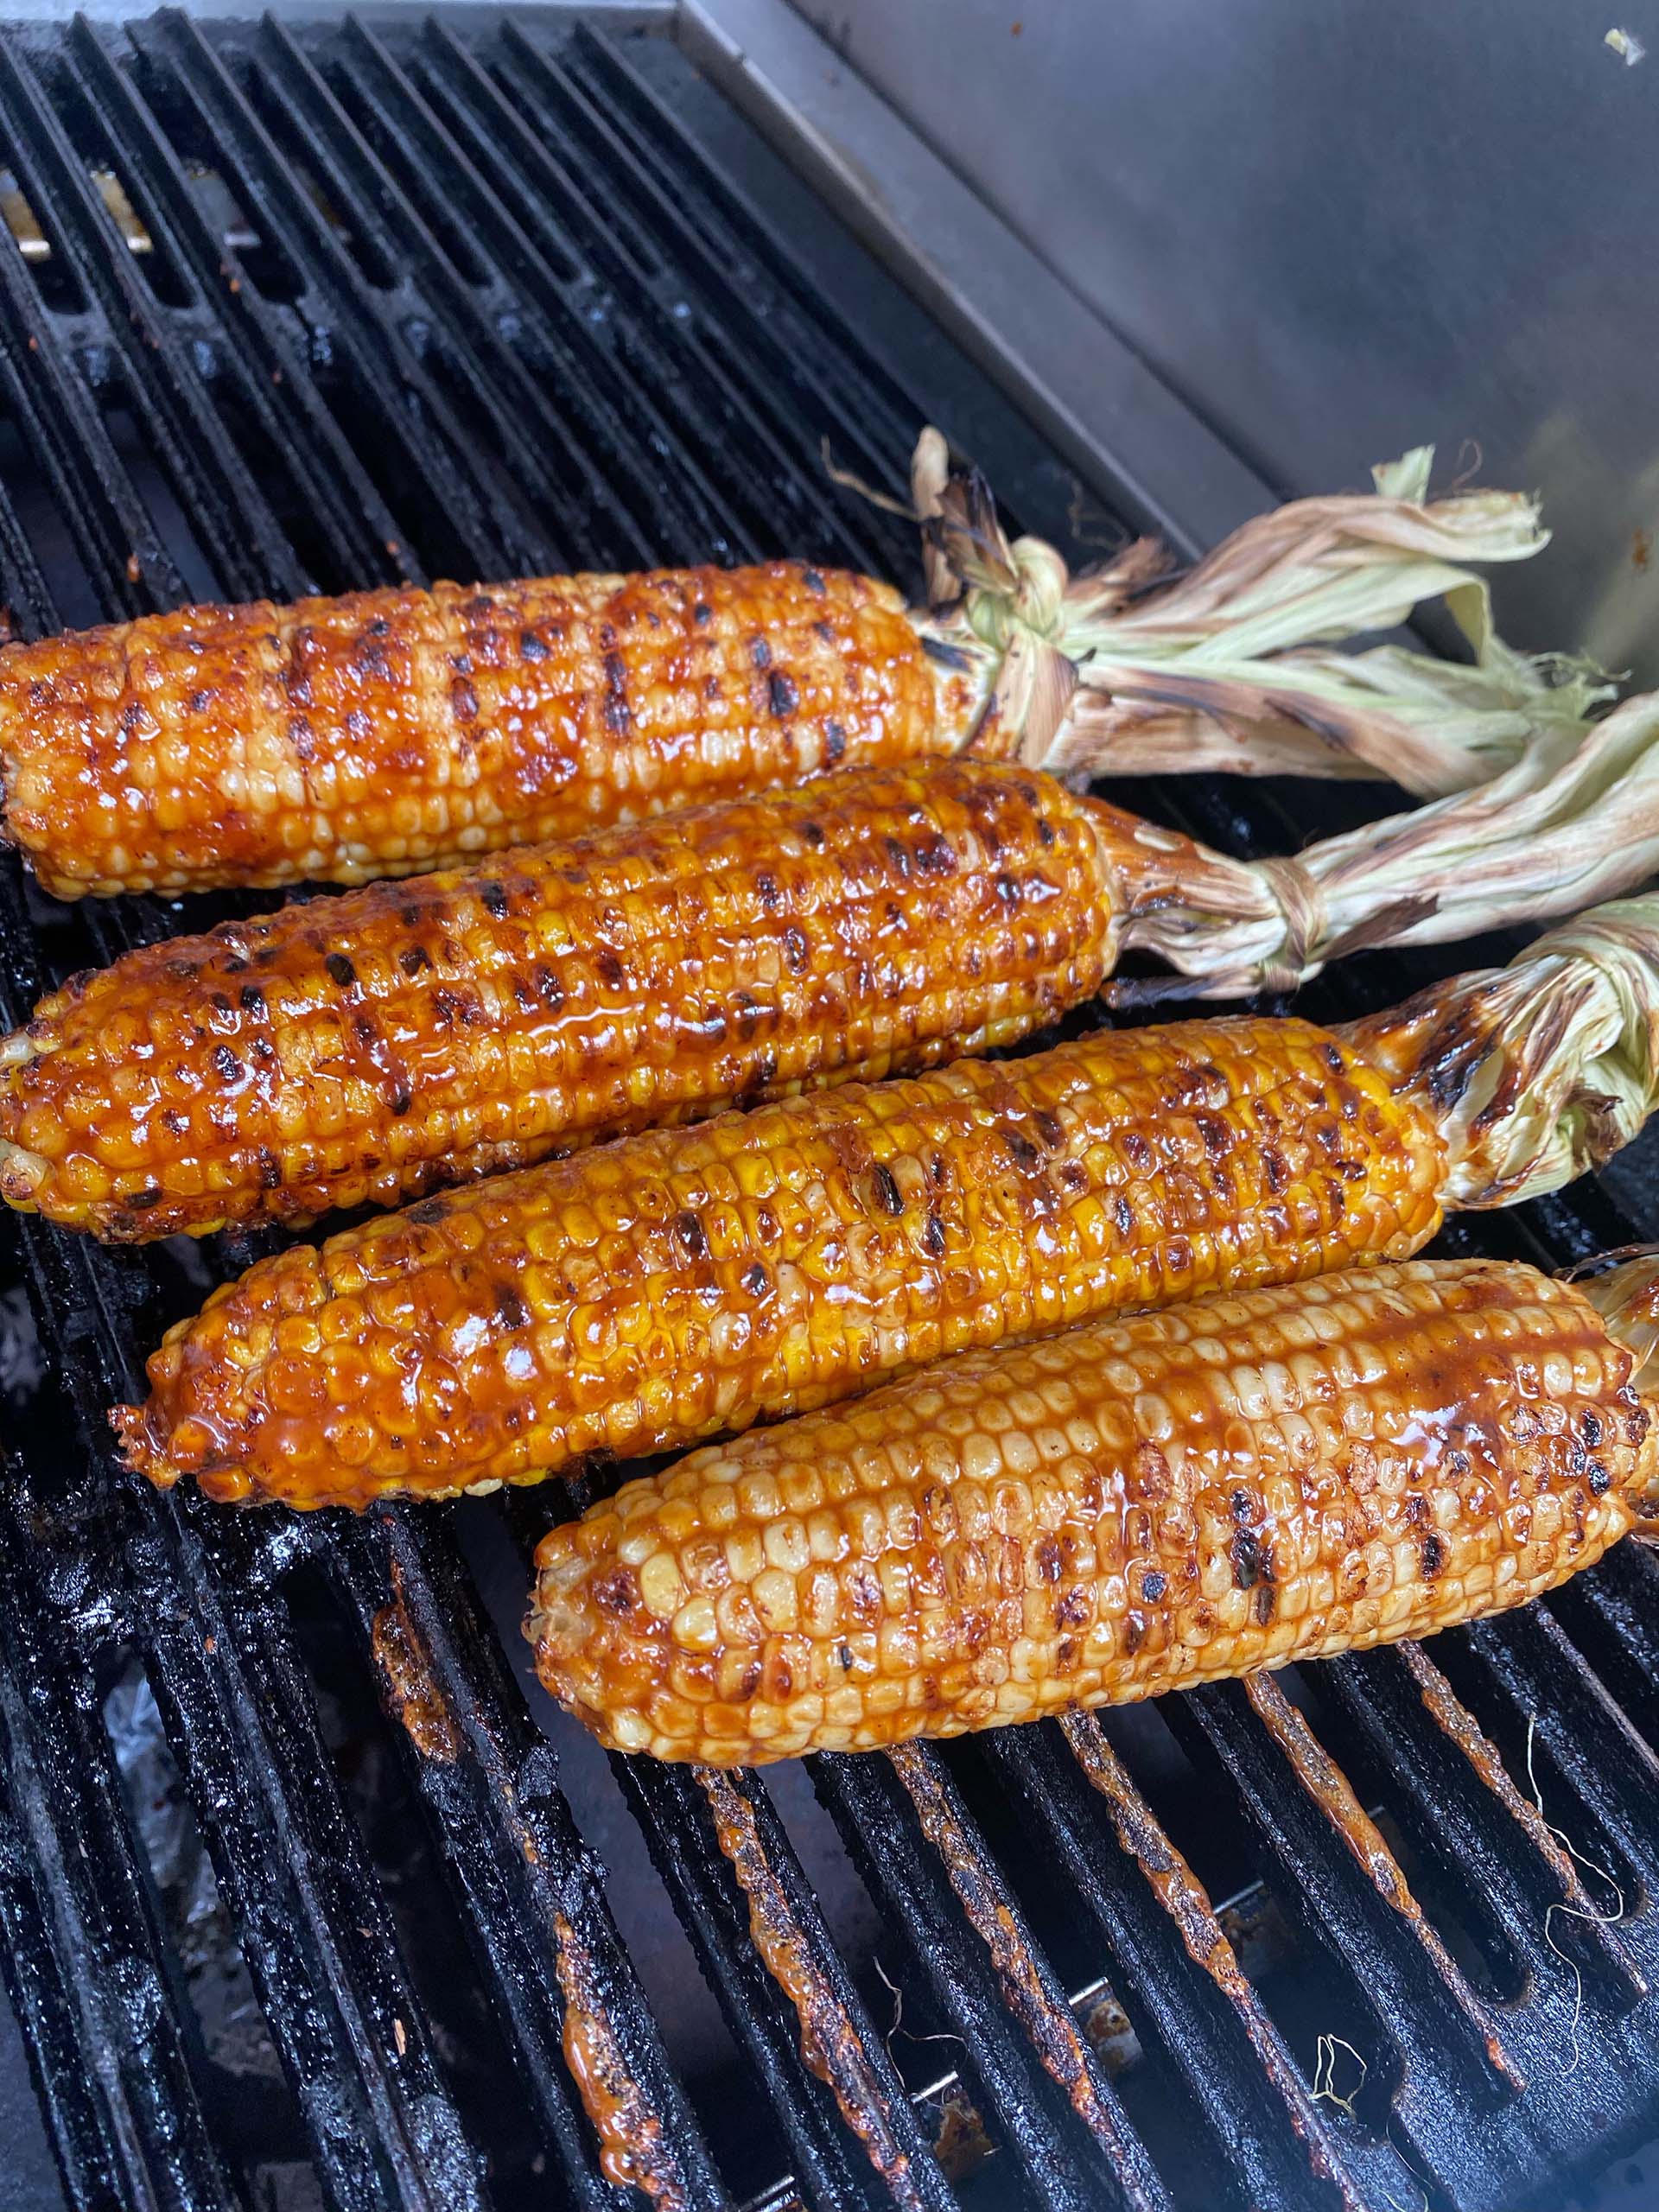 Four ears of sauce-slathered corn cook on a grill.